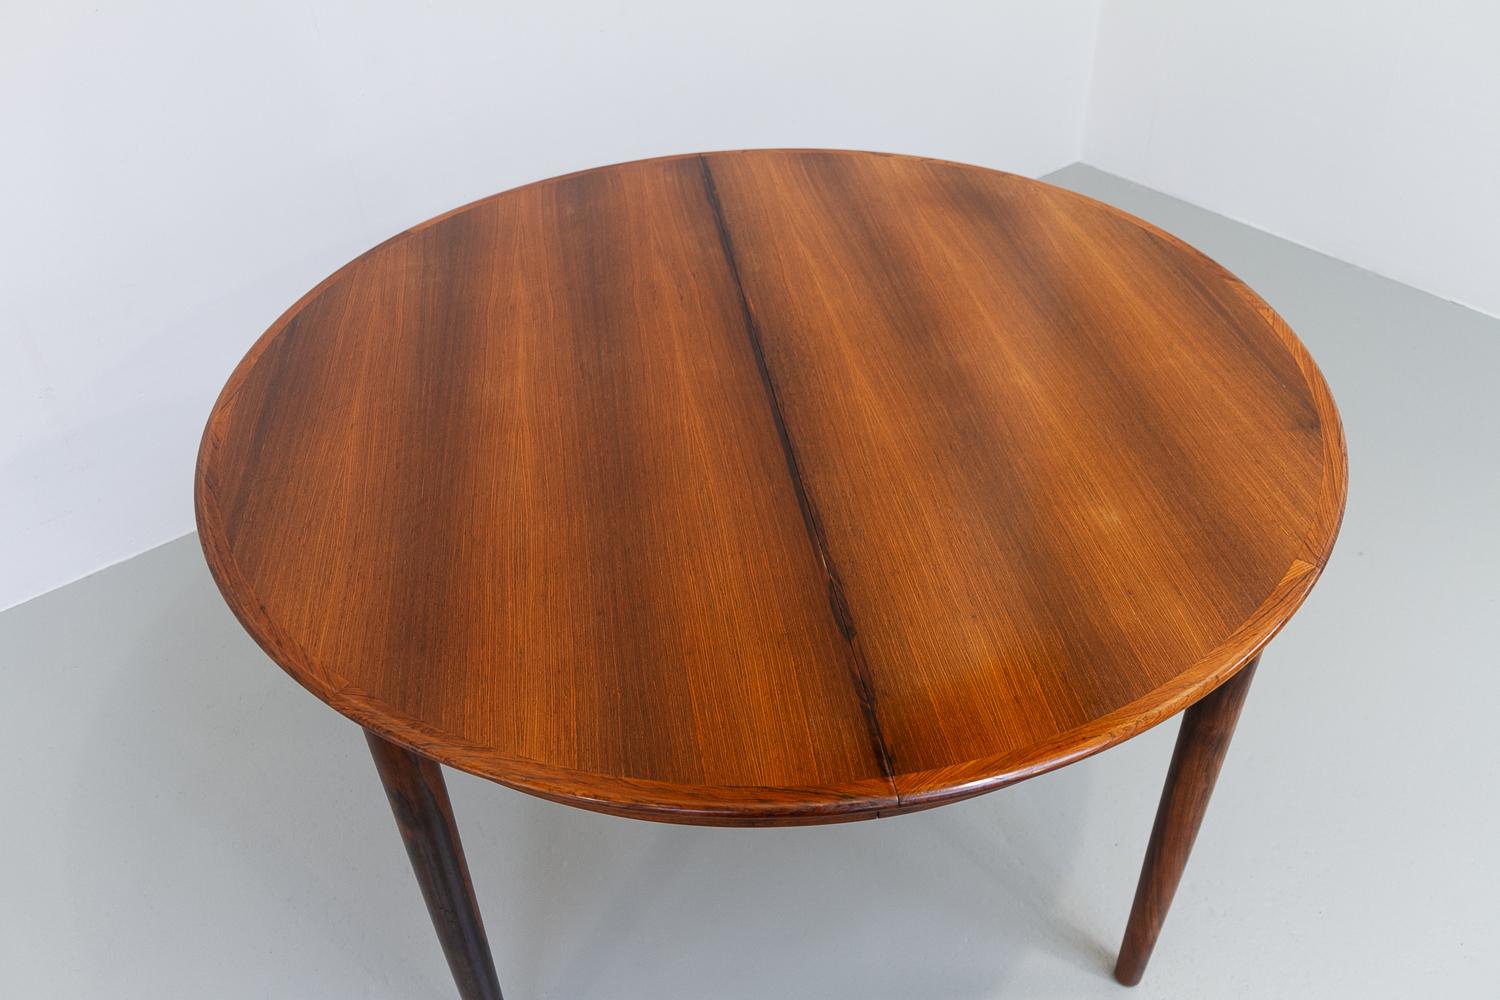 Scandinavian Modern Vintage Danish Extendable Rosewood Dining Table by Skovby, 1960s.  For Sale